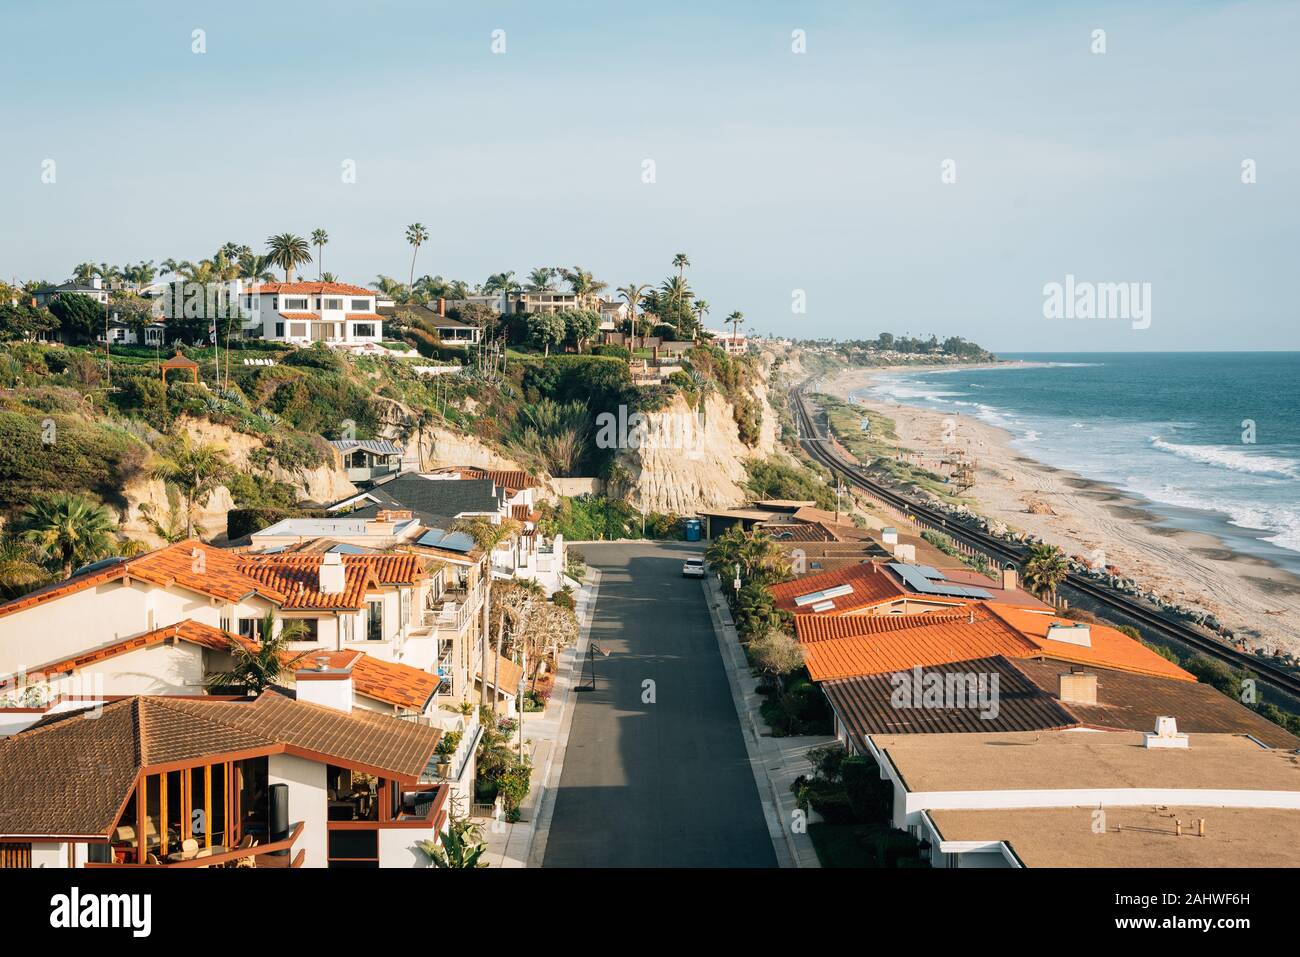 View of houses and beach in San Clemente, California Stock Photo